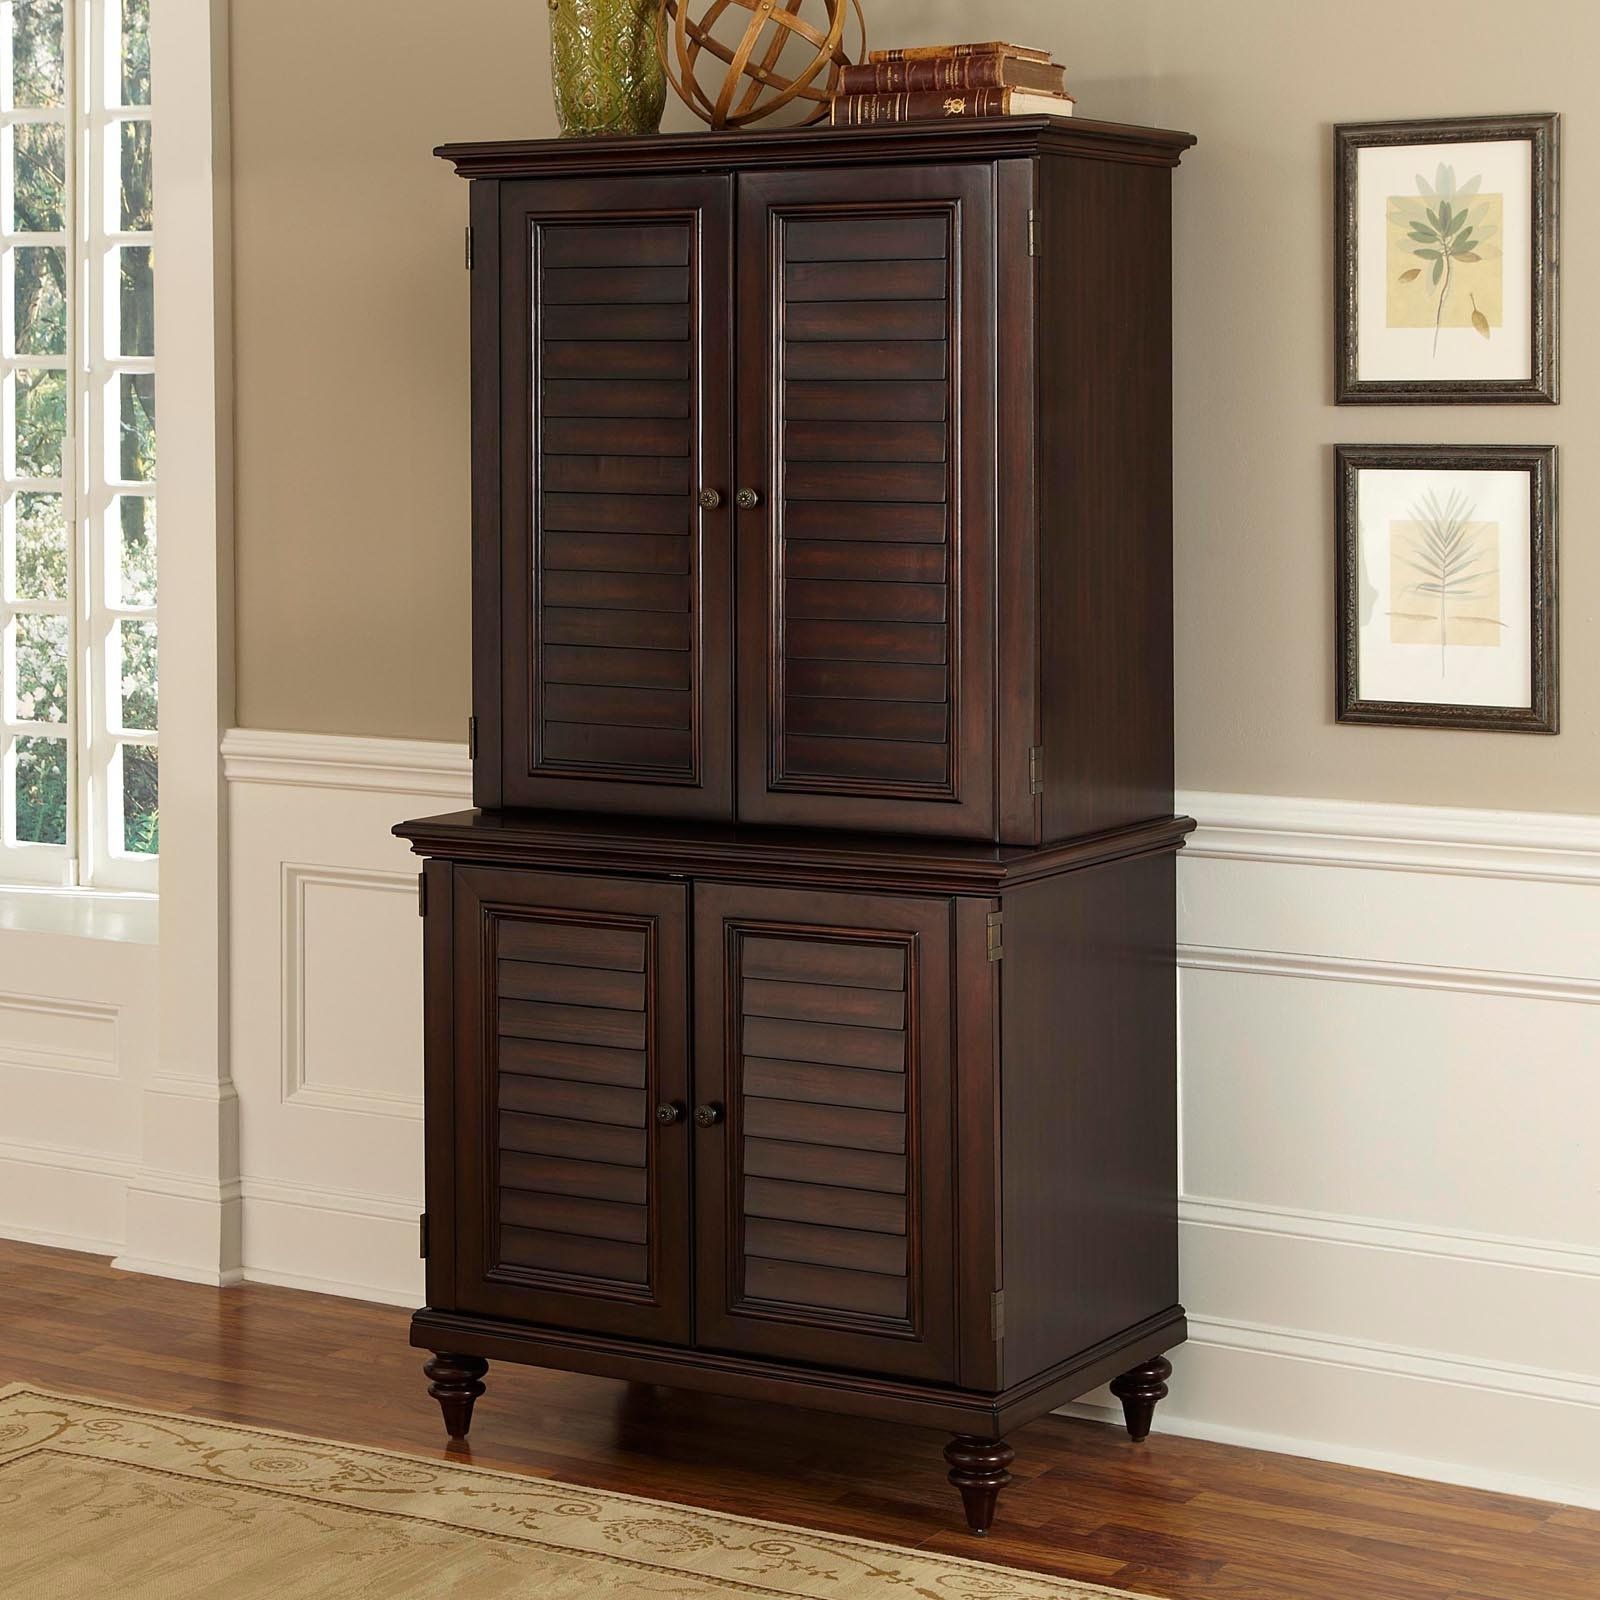 2018 Furniture: Desk Armoire For Home Office Furniture With Enclosed Intended For Enclosed Computer Desks (View 6 of 20)